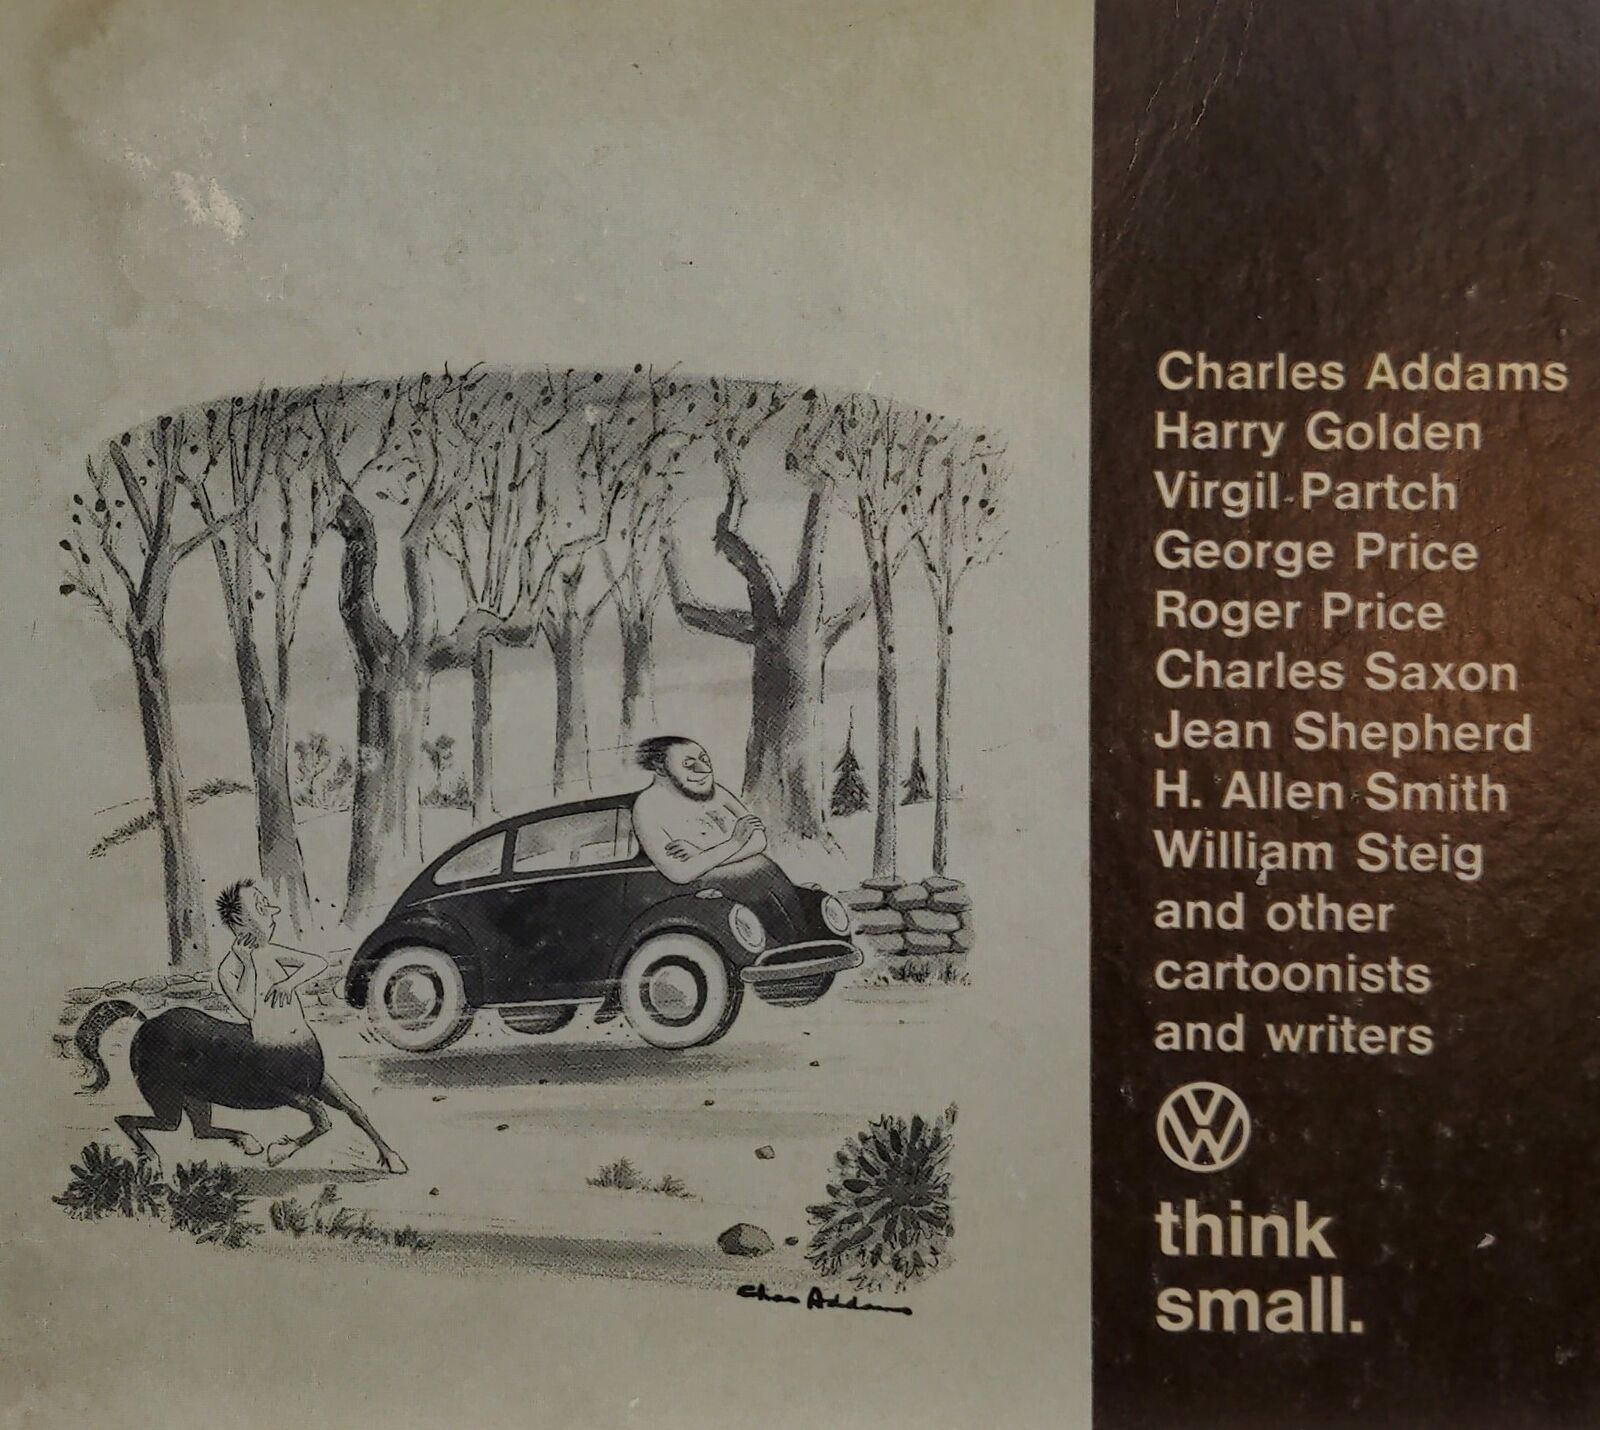 VW ~ Illustrated Cartoons and Jokes, THINK SMALL Hardcover Book 1967 Volkswagen